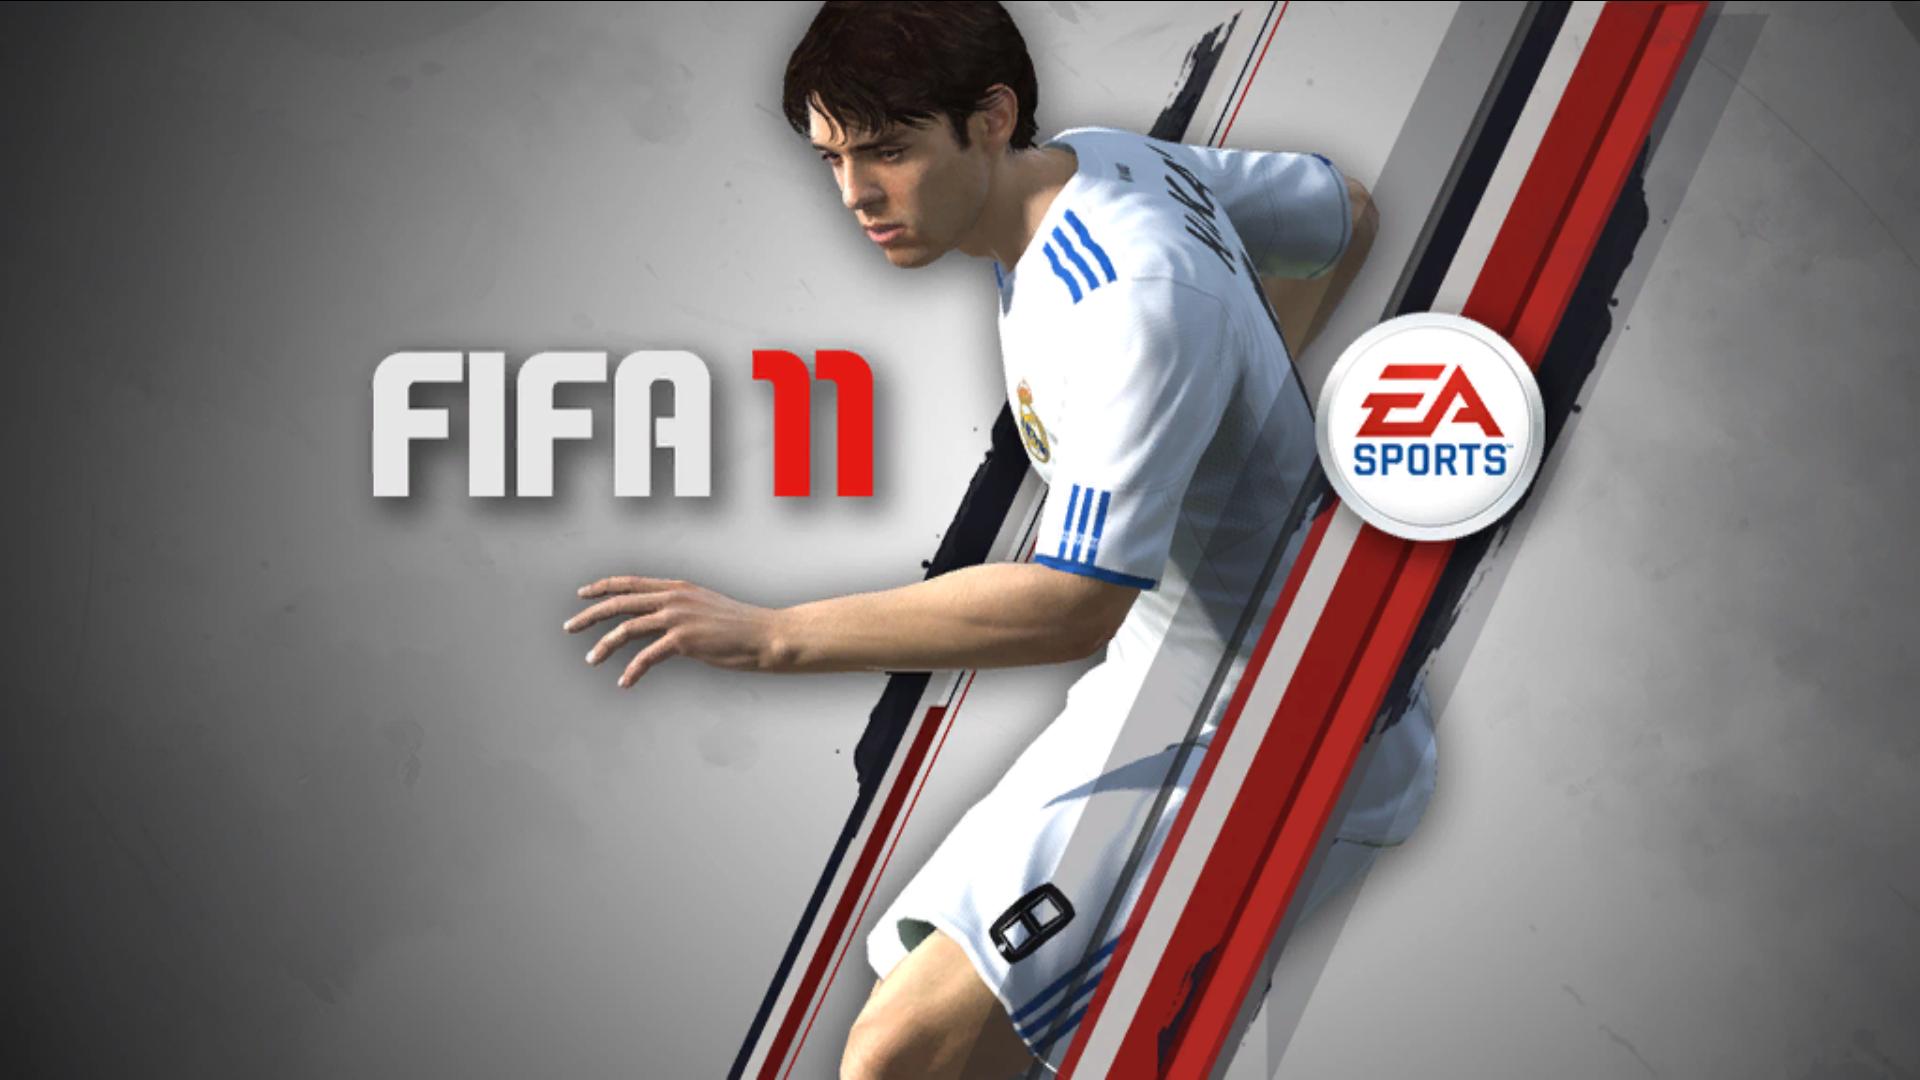 Fifa 11 wallpapers for desktop, download free Fifa 11 pictures and  backgrounds for PC 